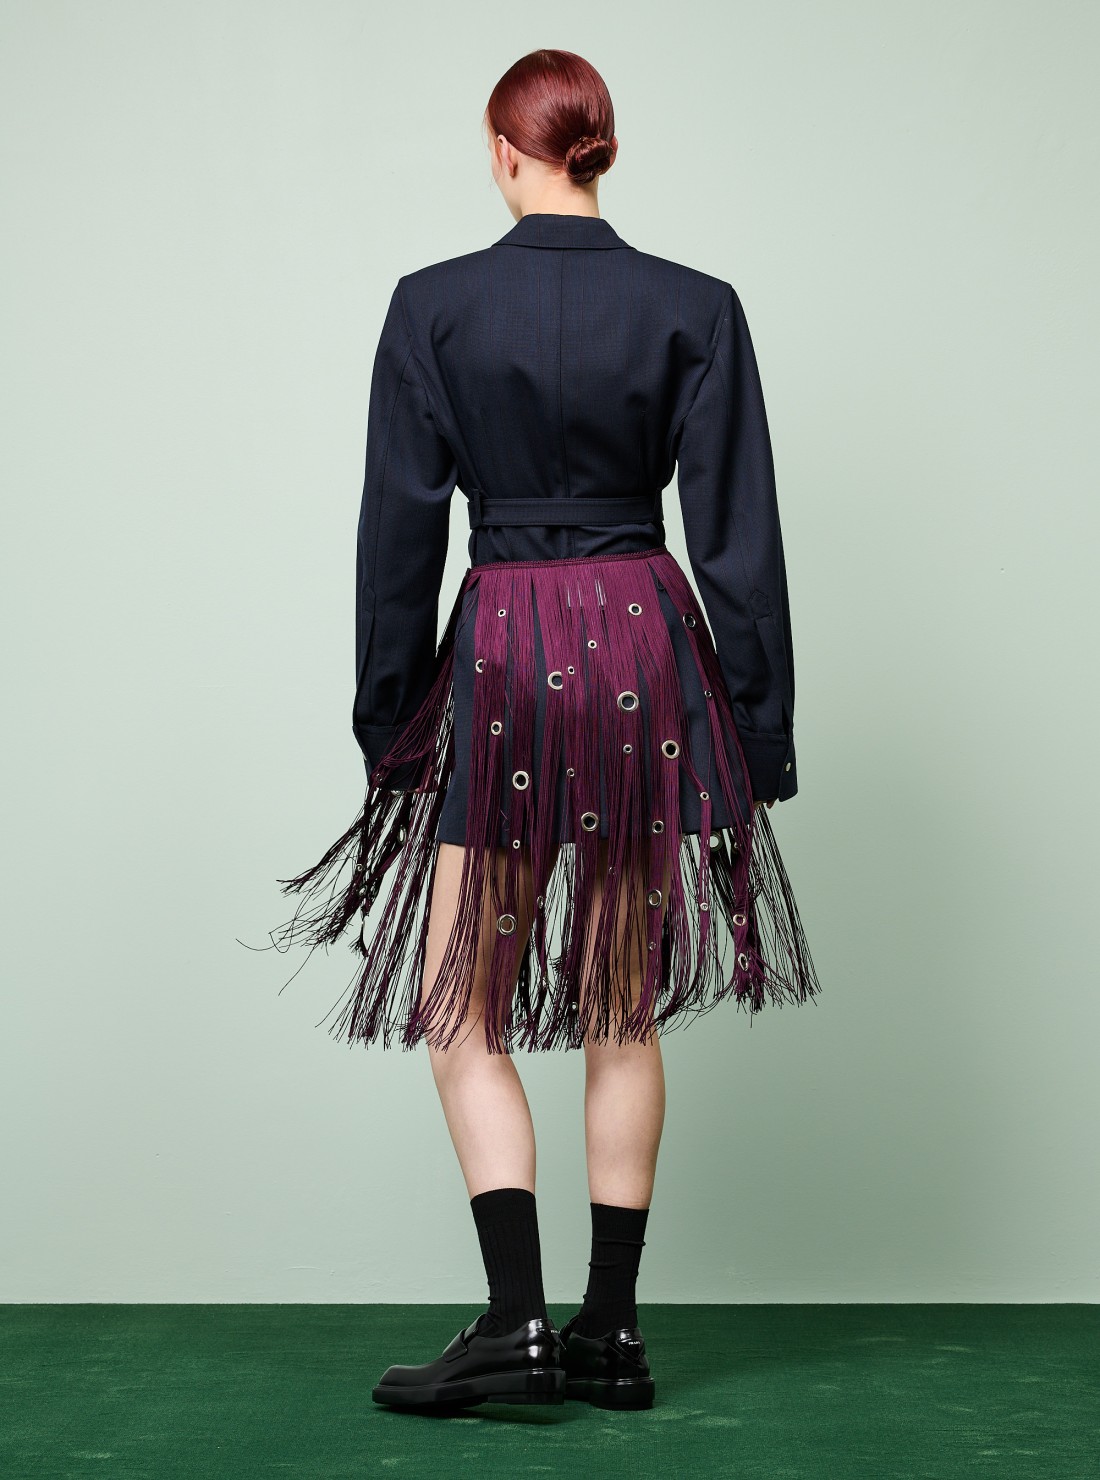 skirt with eyelet